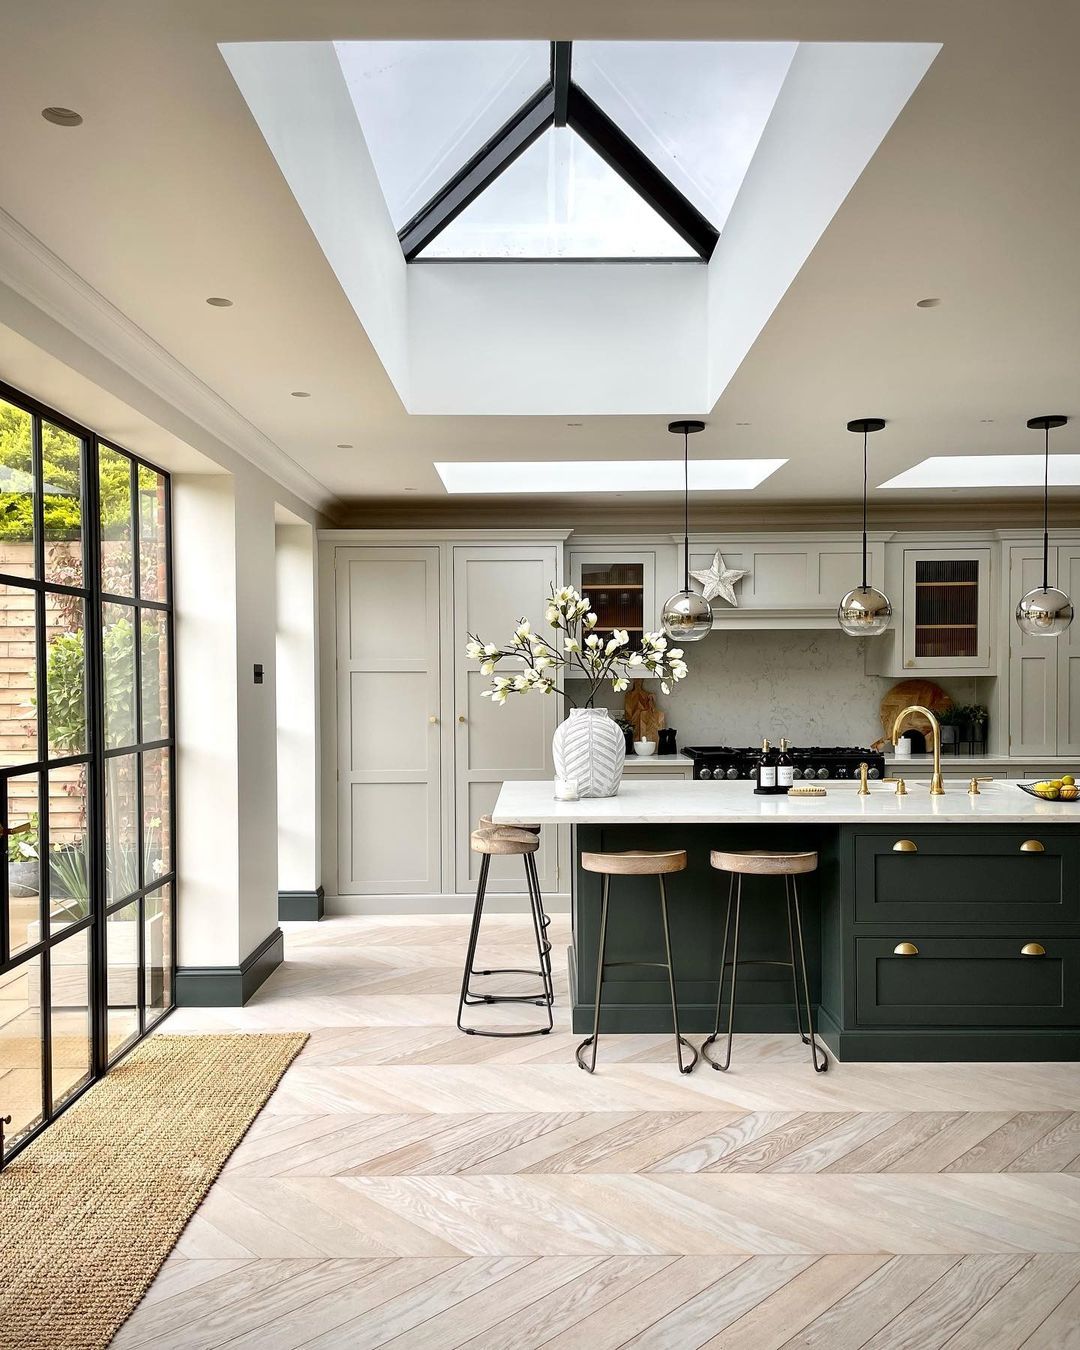 Embrace Connectivity: Open Kitchen Designs That Bring Families Together